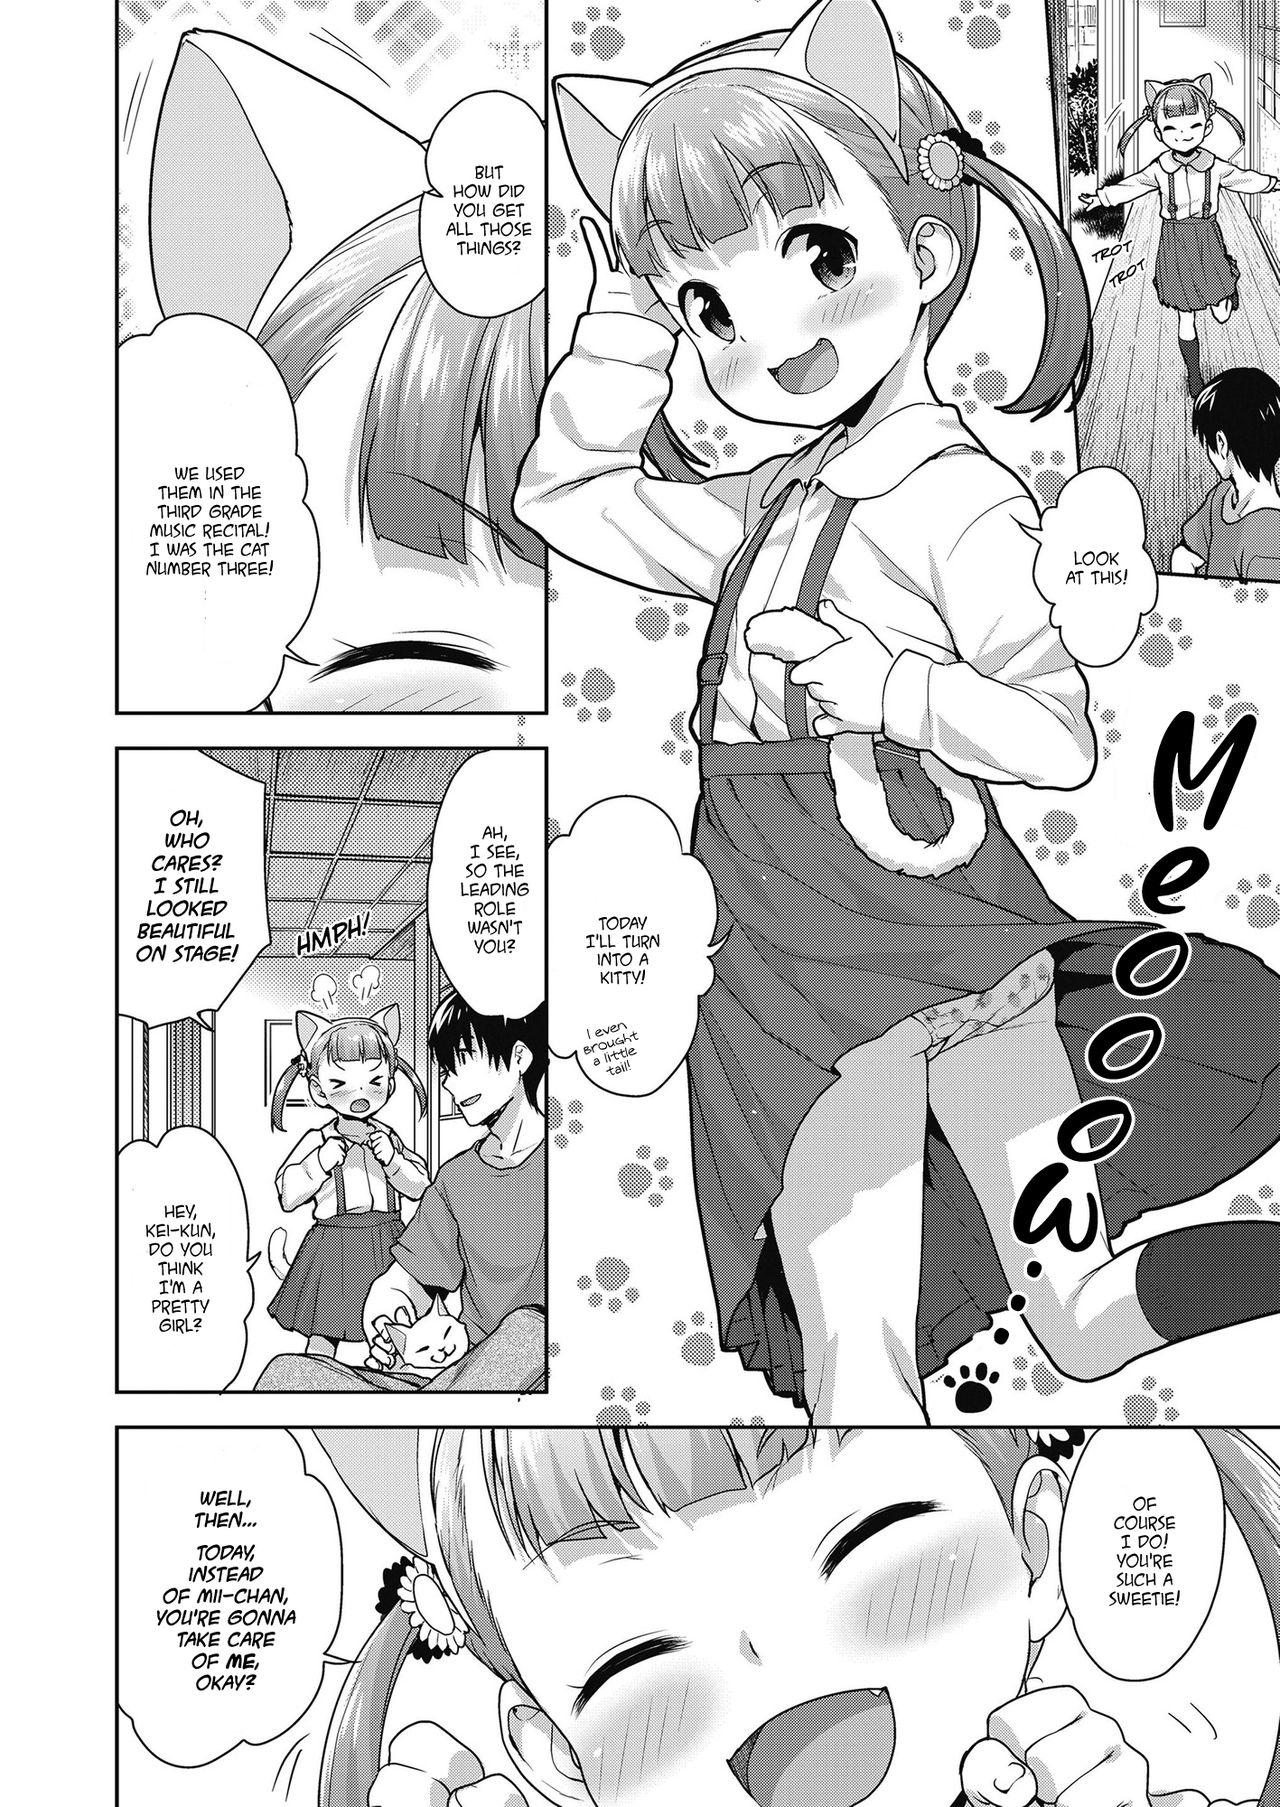 And Koneko no Tsubomi | The Blooming of the Kitty Cums - Page 2